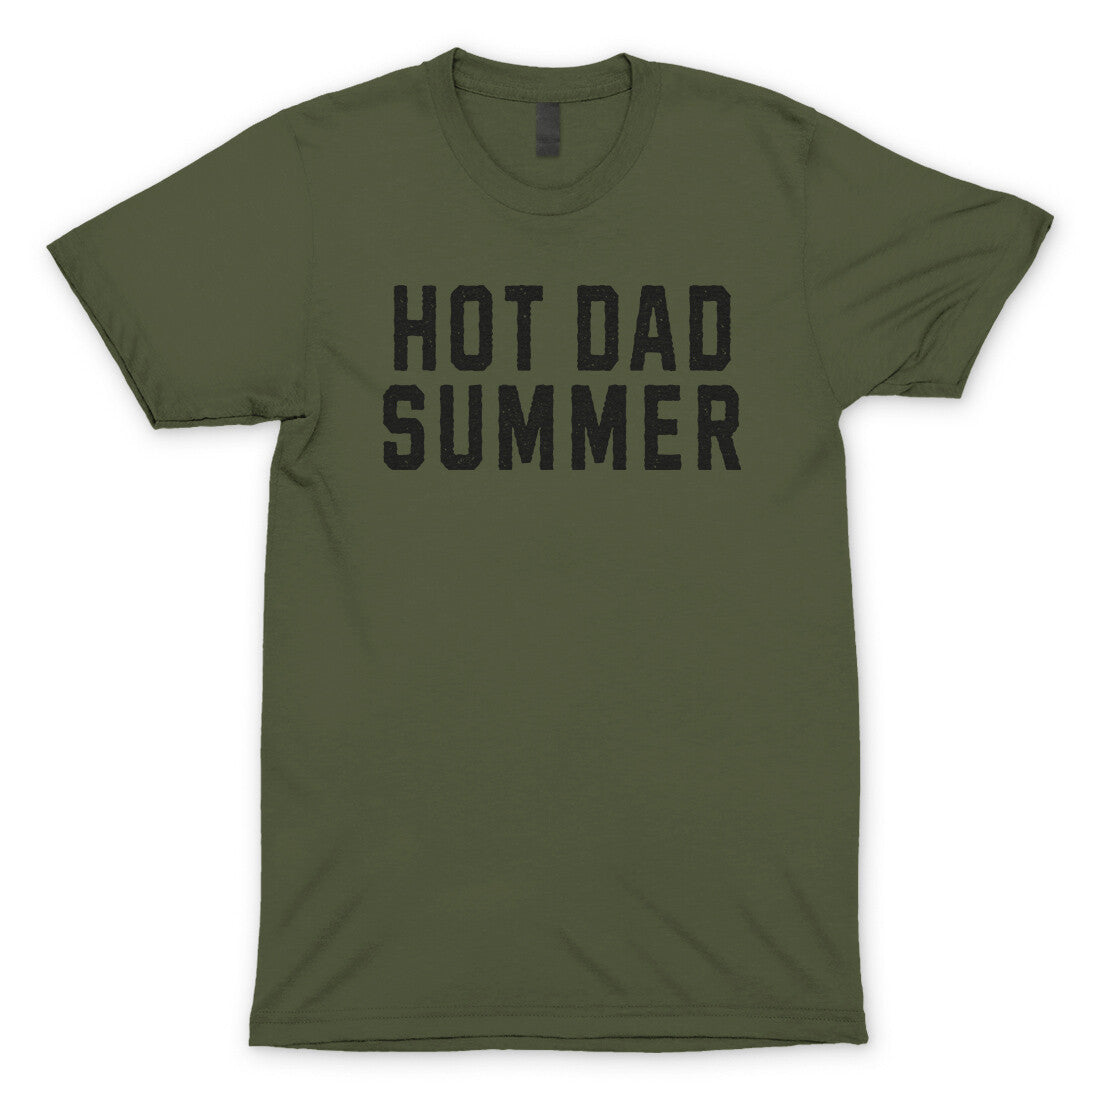 Hot Dad Summer in Military Green Color